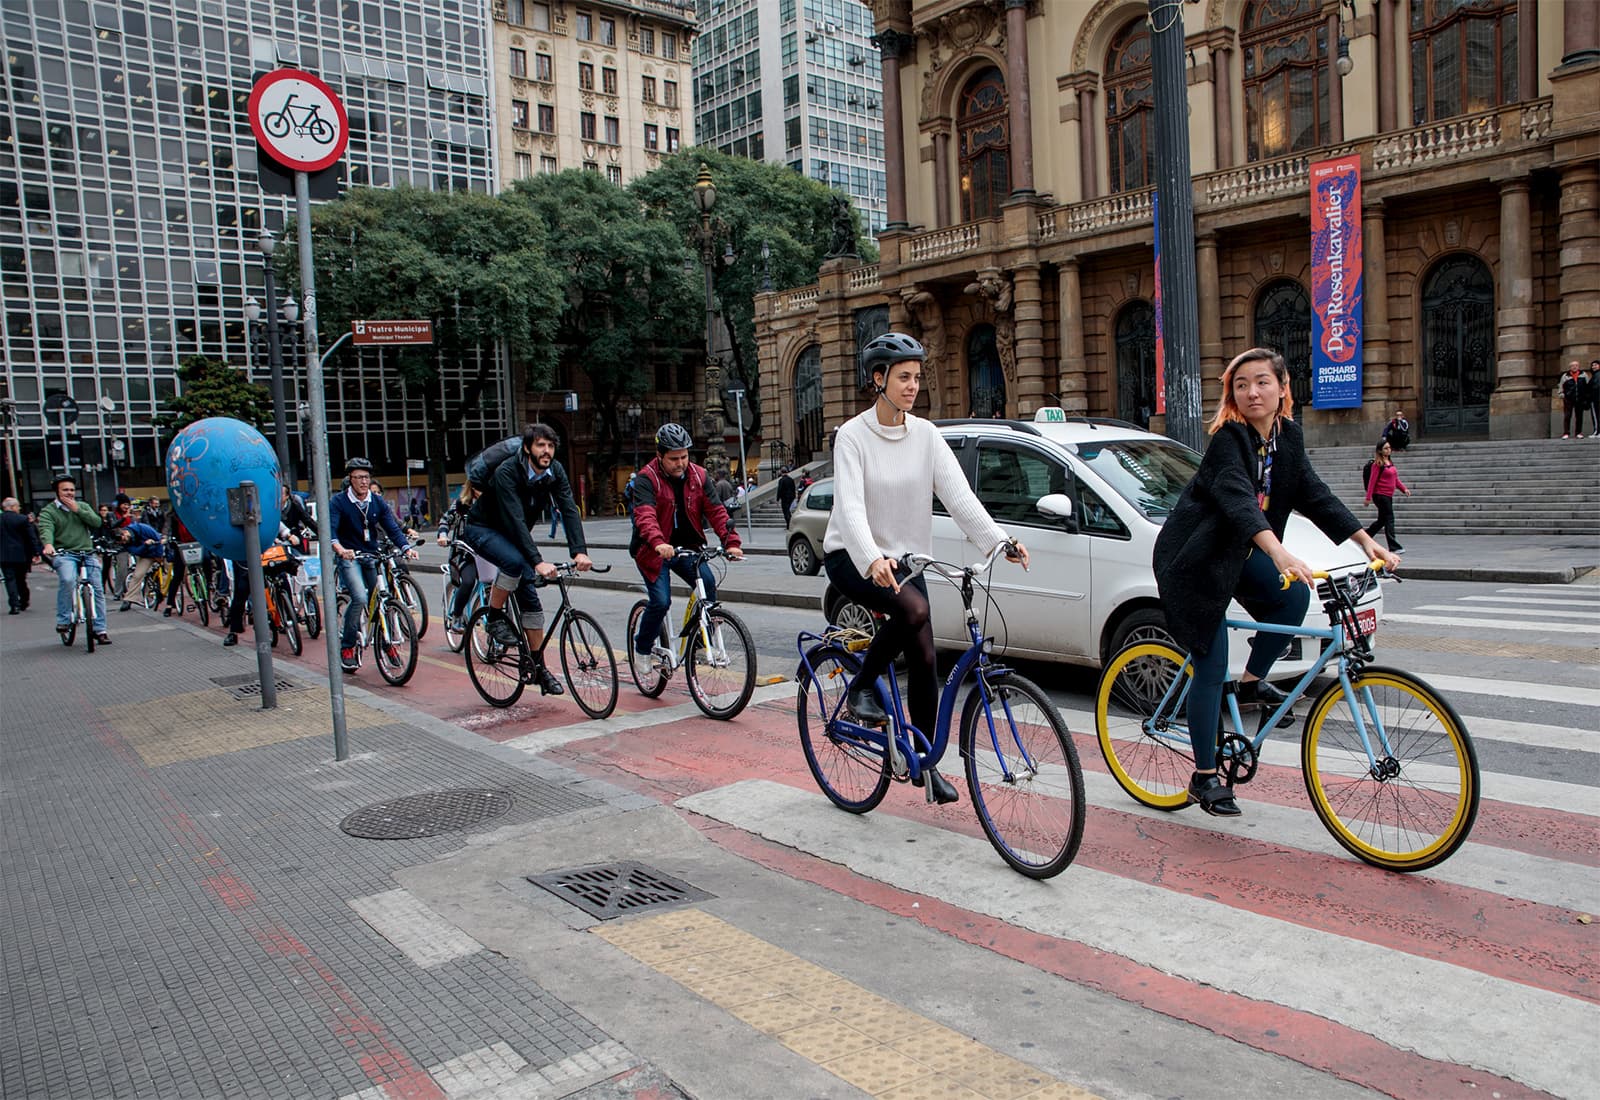 The city of São Paulo, a member of the Partnership for Healthy Cities, evaluates the effectiveness of communication campaigns encouraging the use of helmets.